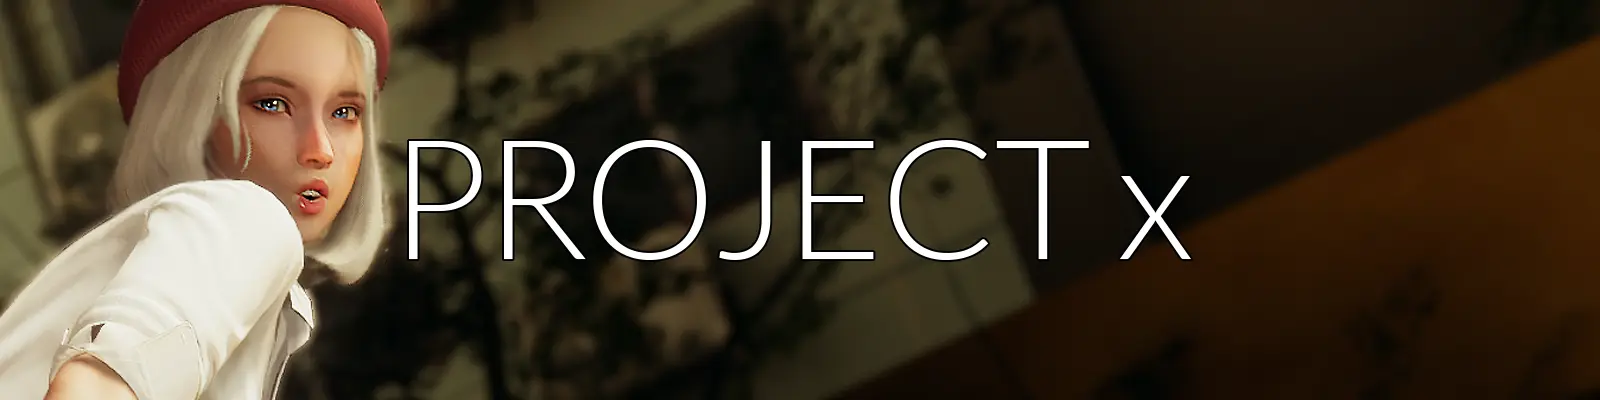 Project X main image